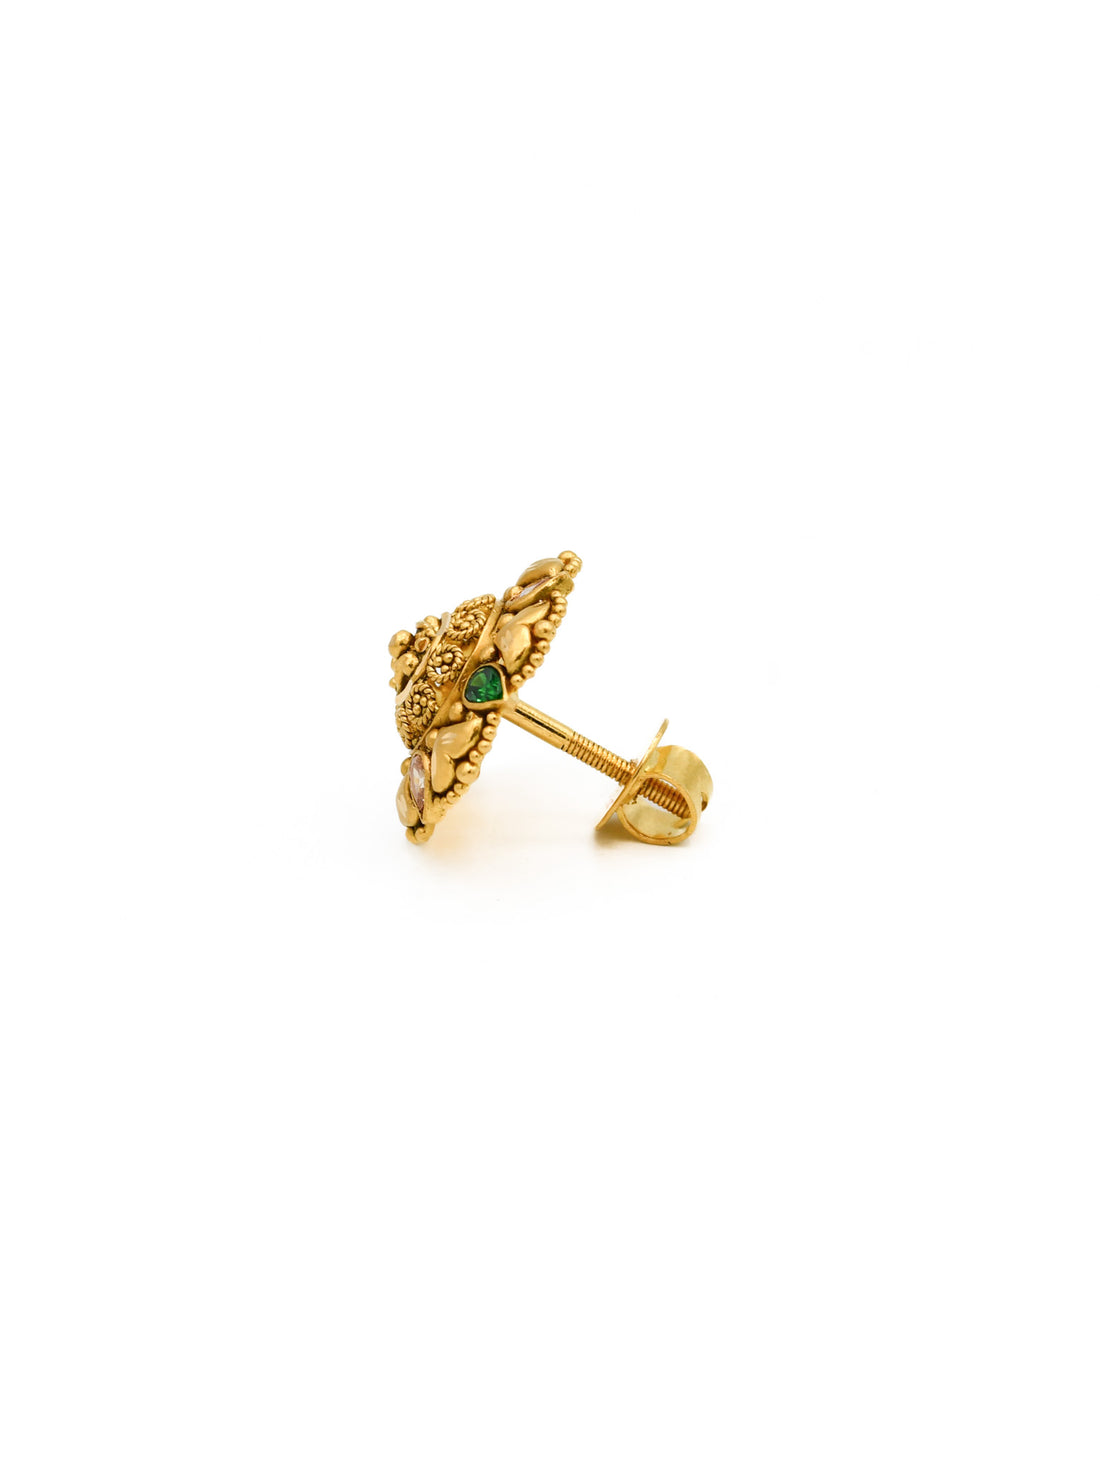 22ct Gold Antique Green CZ Tops